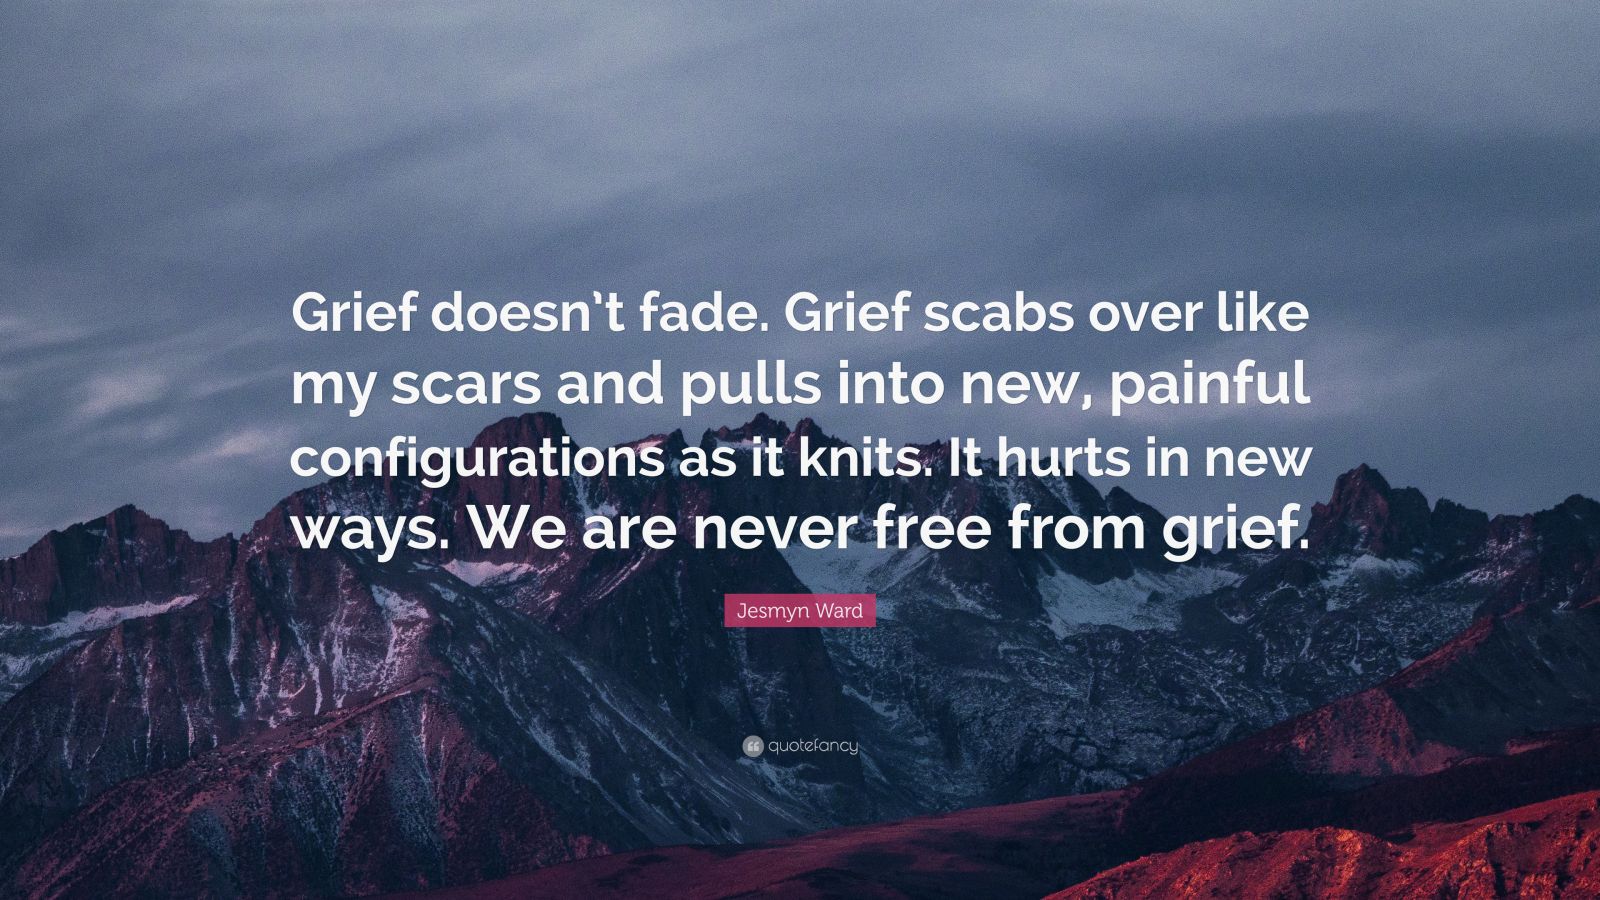 Jesmyn Ward Quote: “Grief doesn’t fade. Grief scabs over like my scars ...